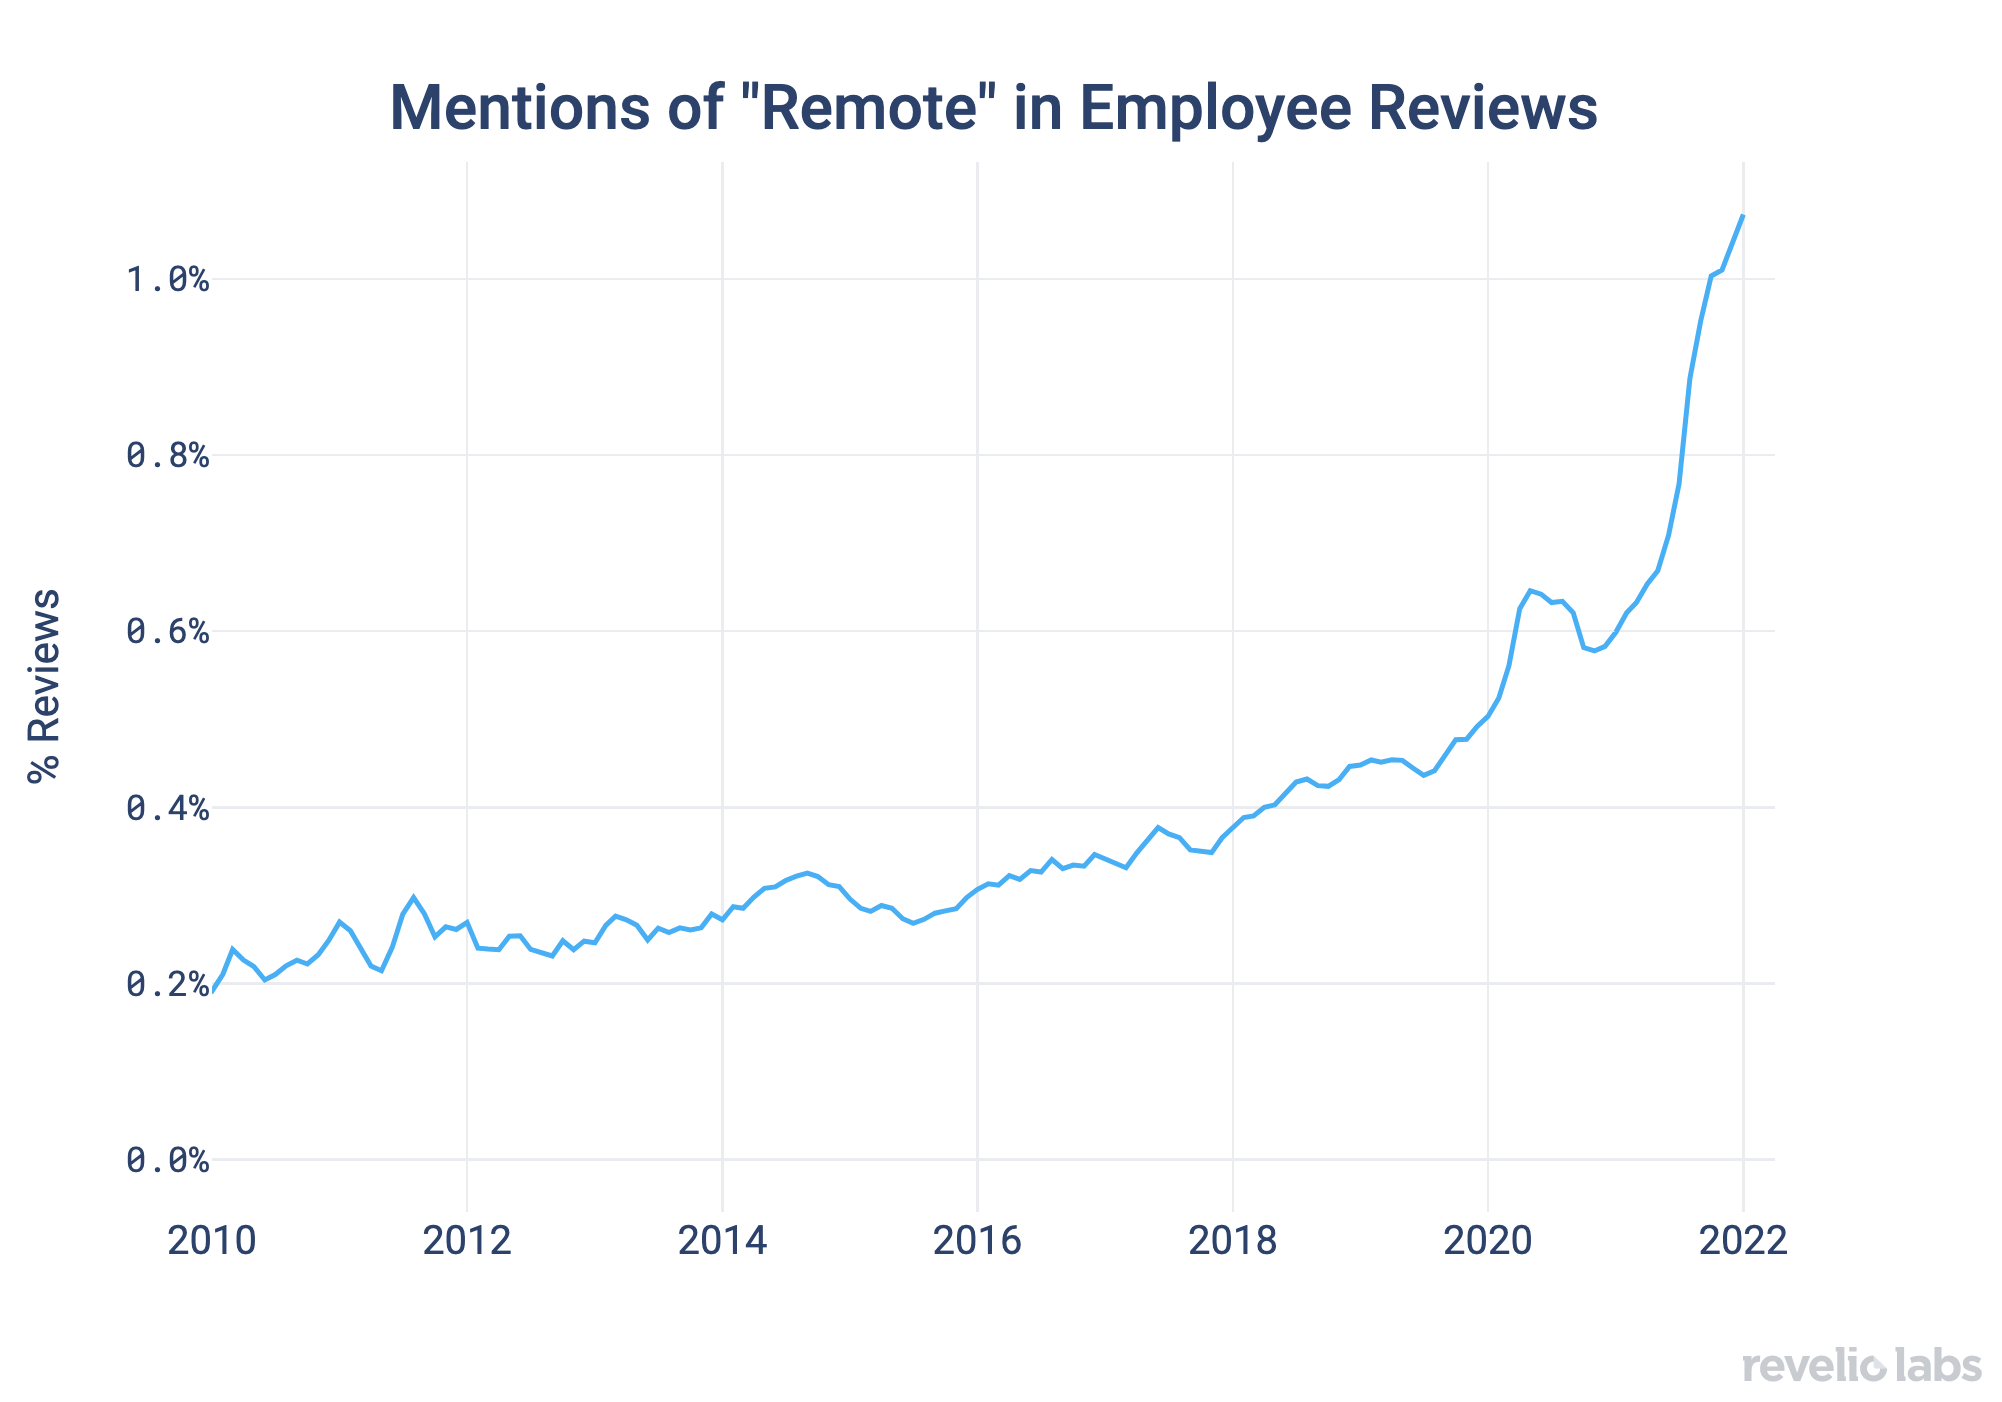 Mentions of "Remote" in Employee Reviews